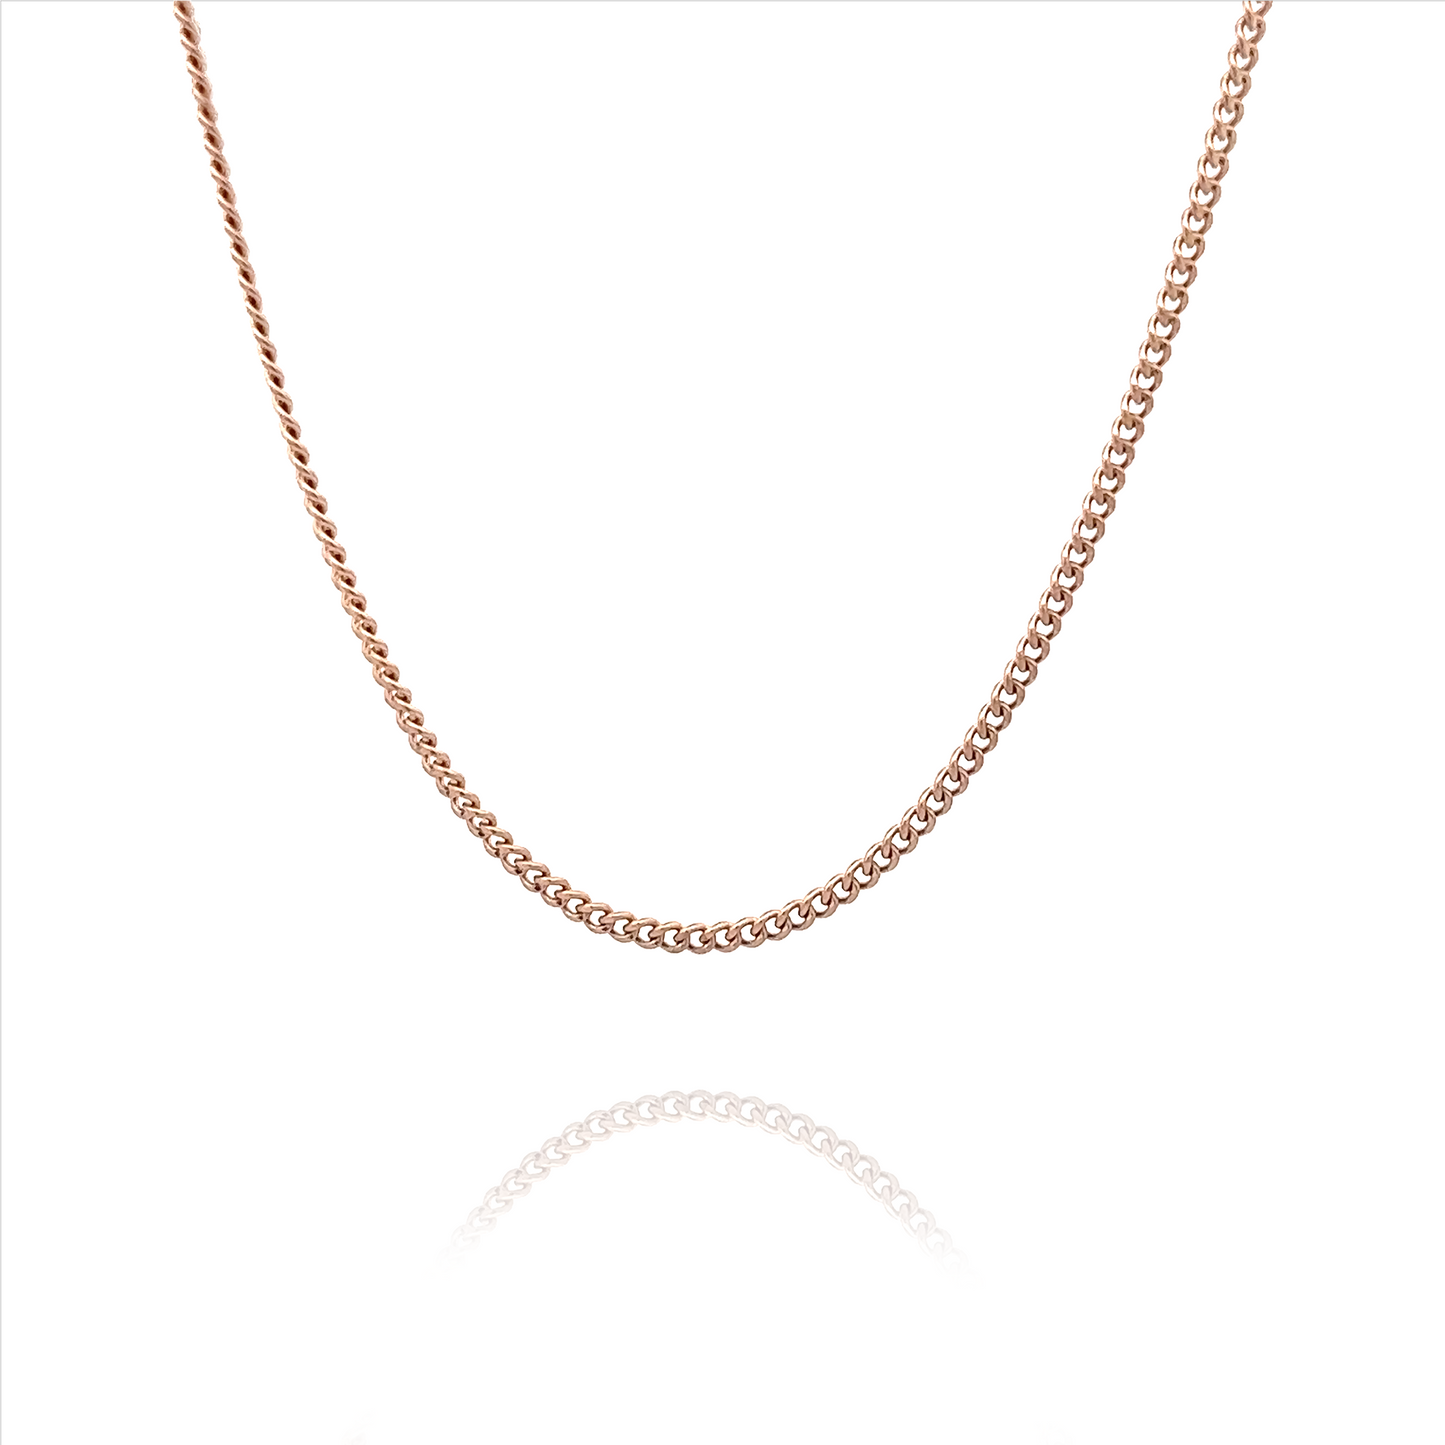 Thin Curb Necklace